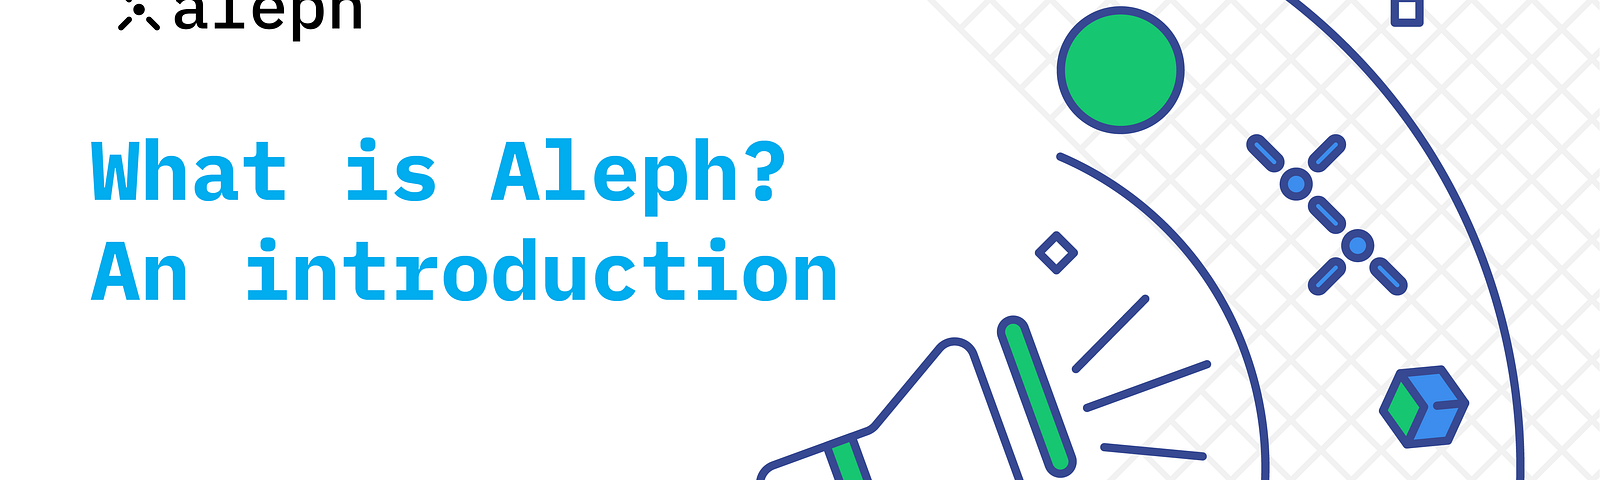 What is aleph? An introduction